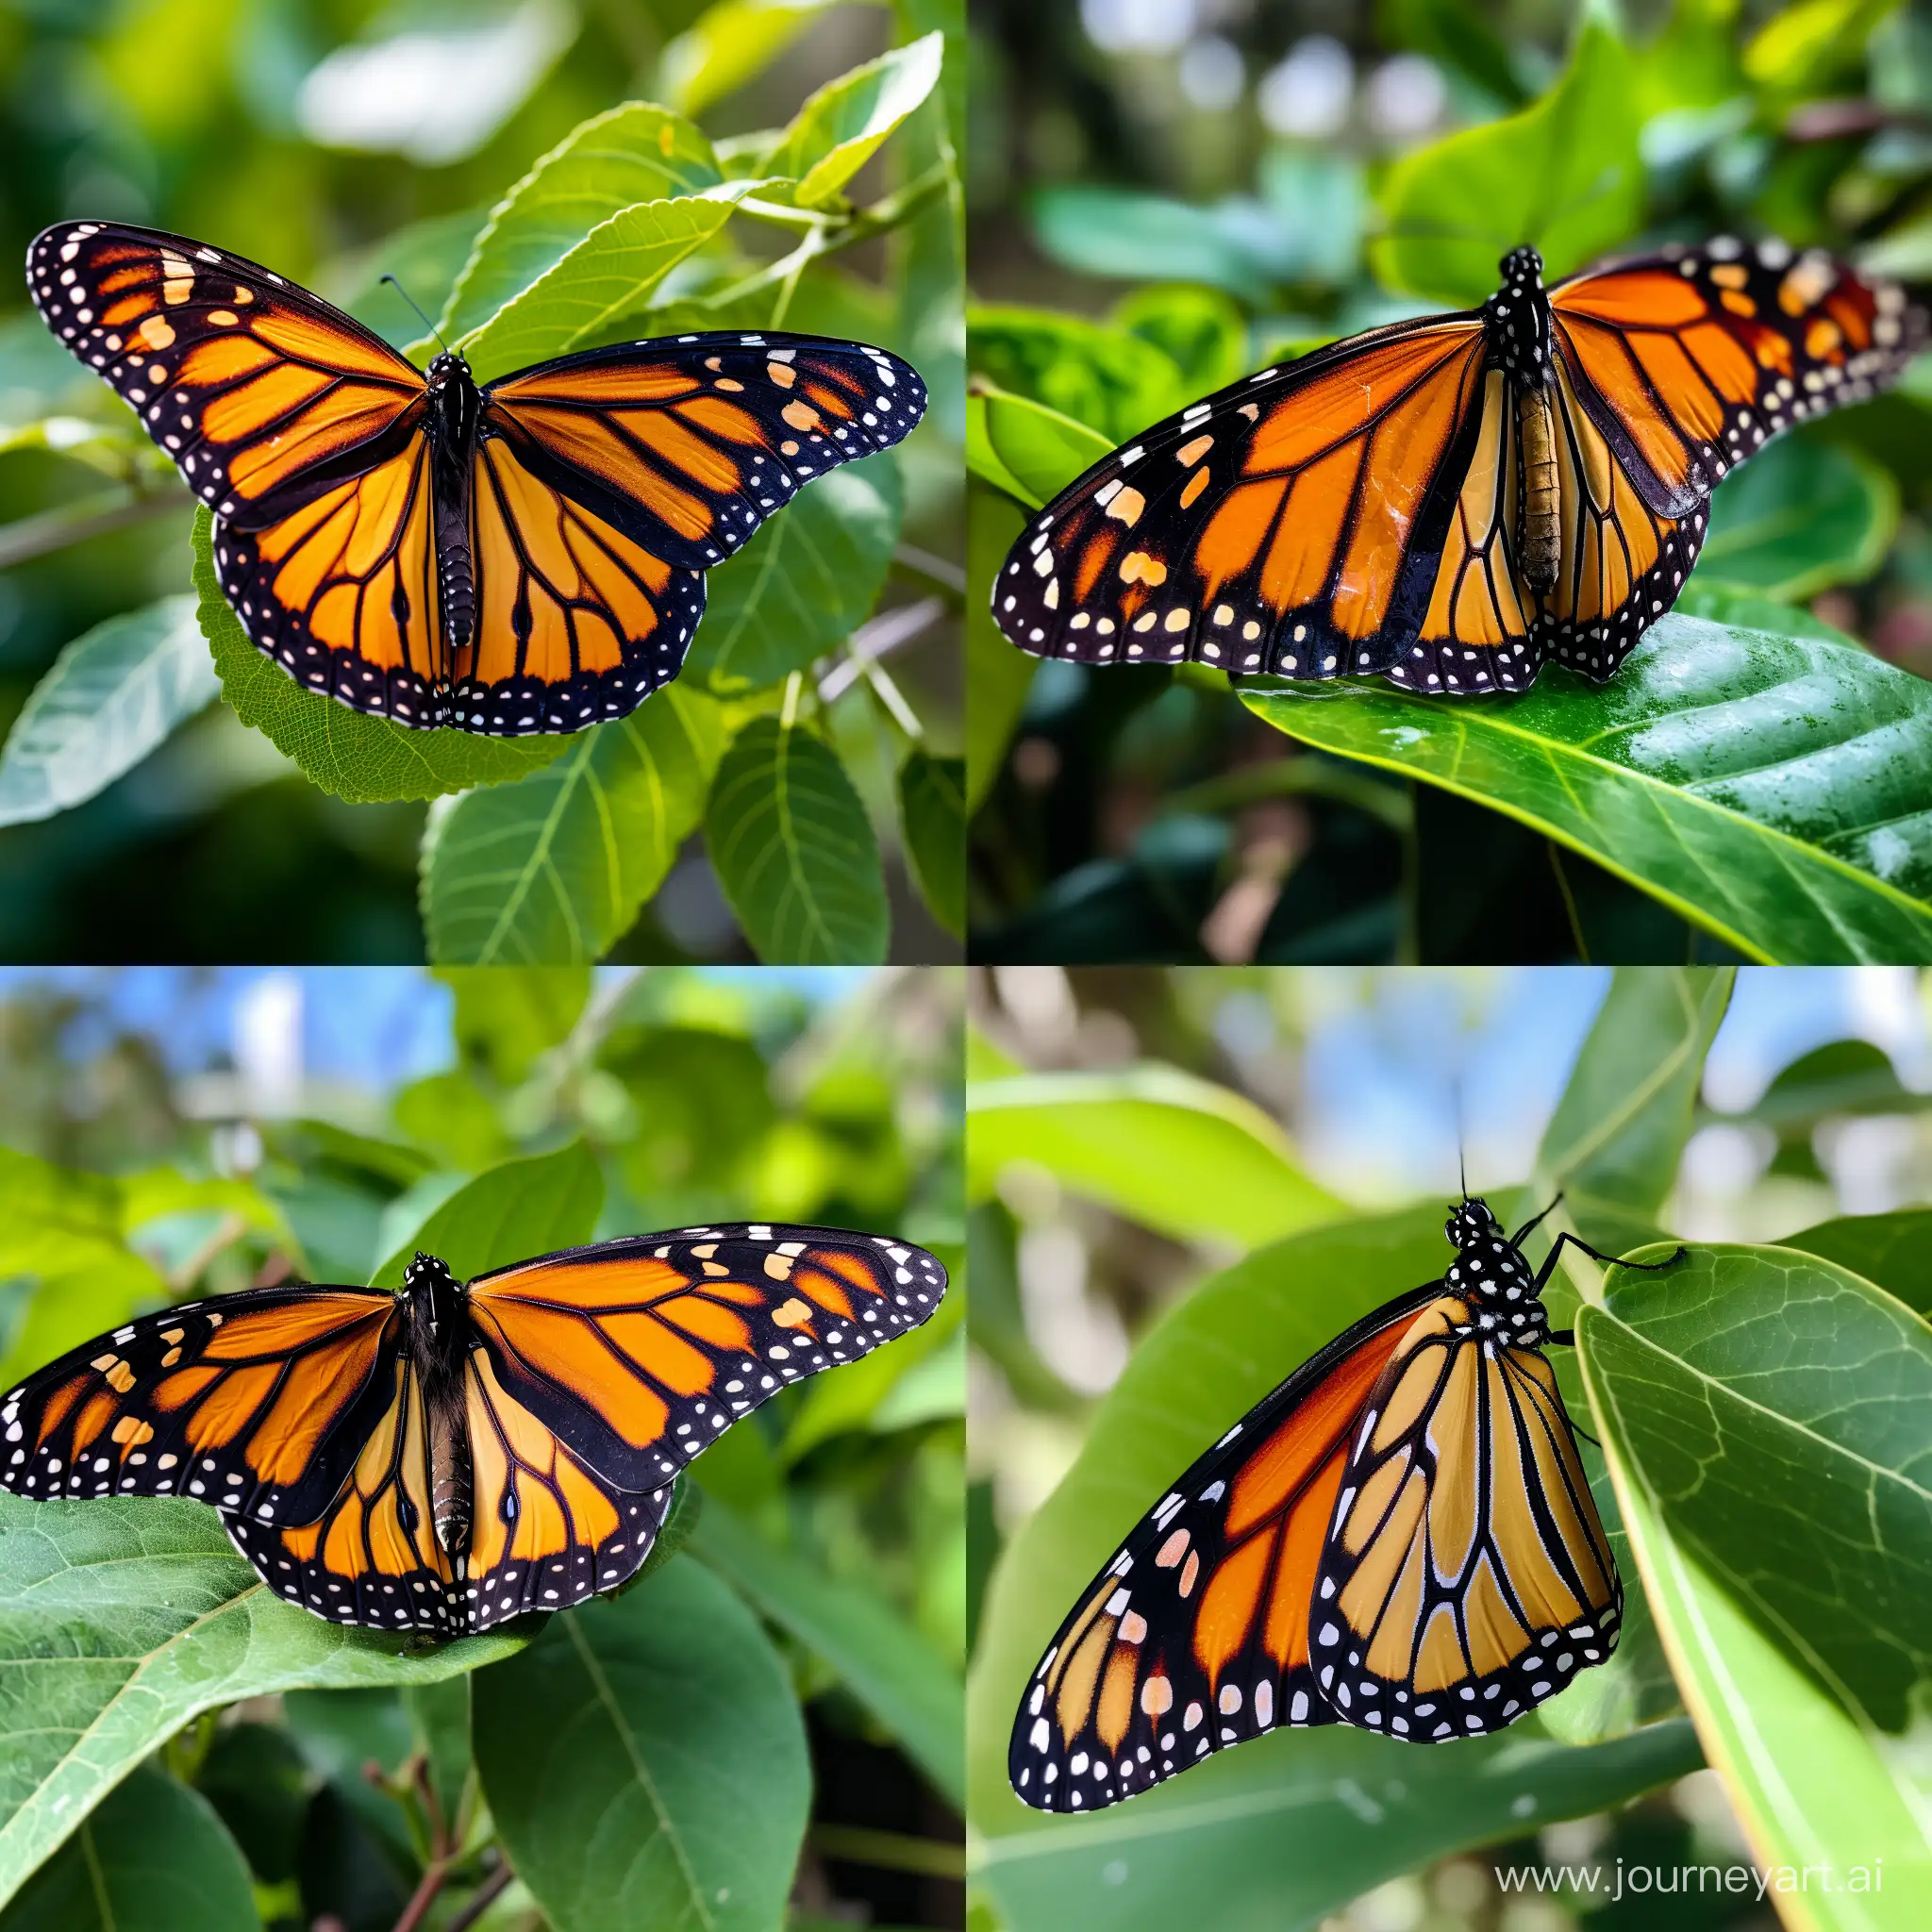 Vibrant-Monarch-Butterfly-on-Green-Leaf-in-Stunning-11-Aspect-Ratio